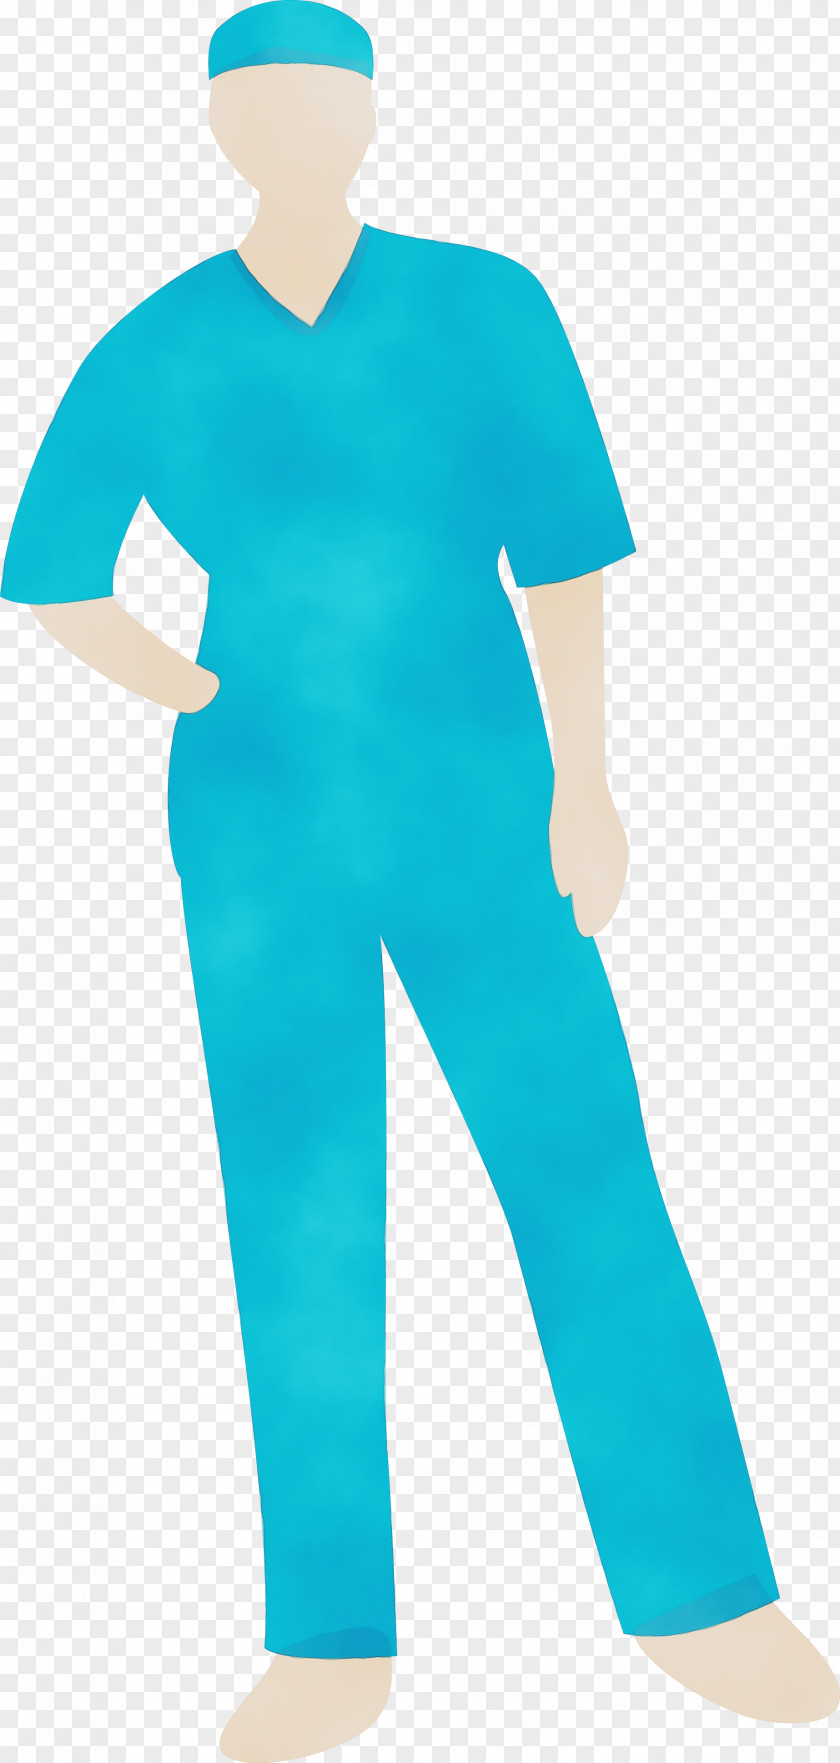 Sleeve Medical Glove Uniform Turquoise PNG